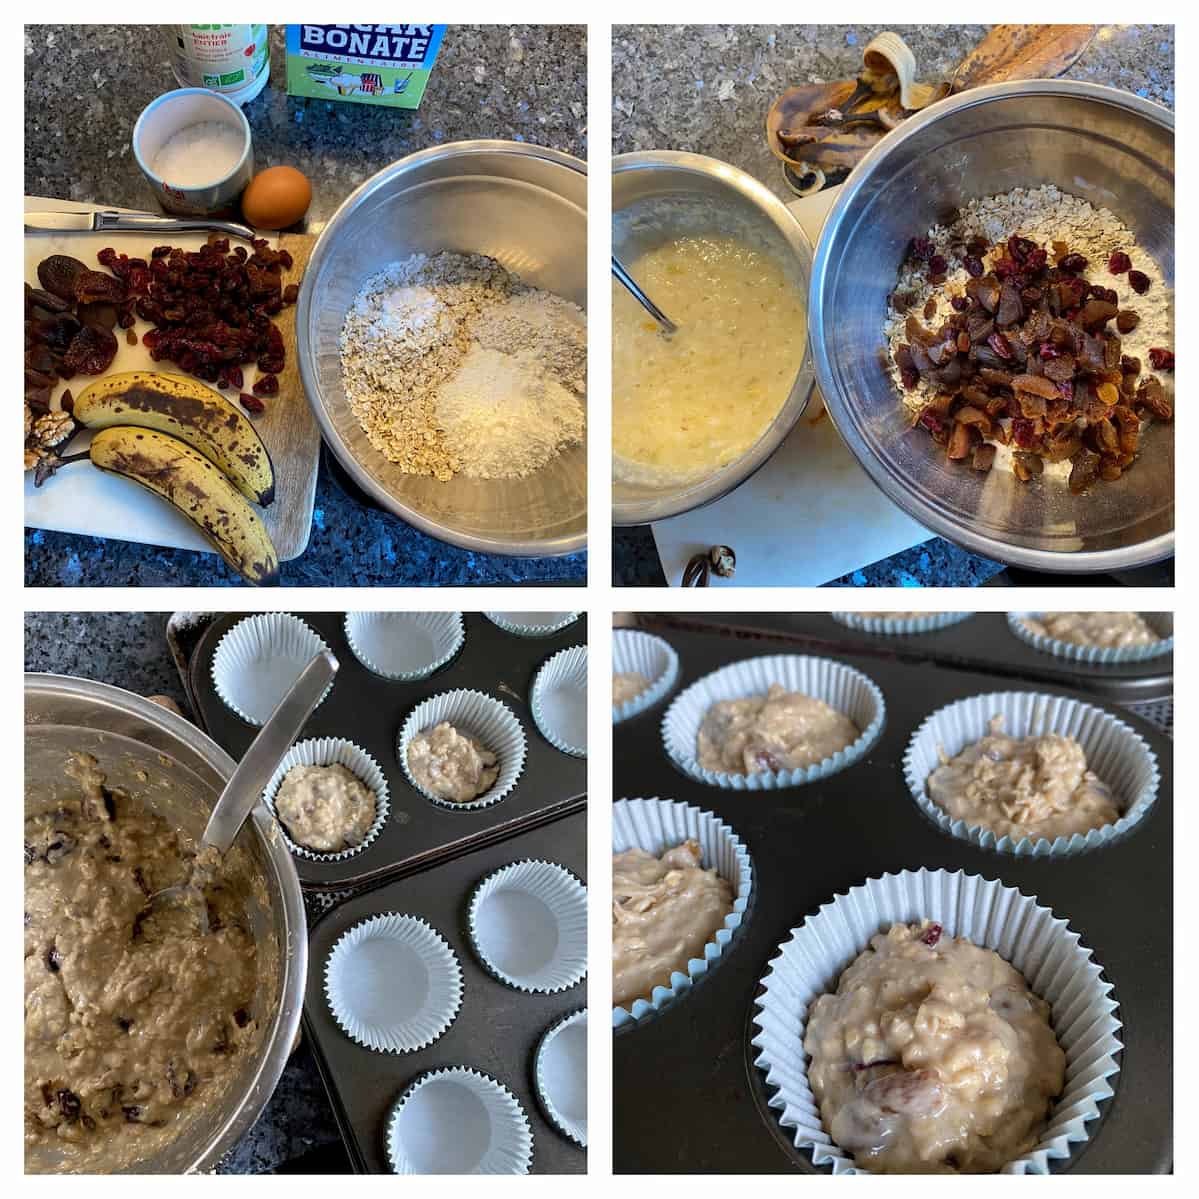 making muffins by mixing wet and dry ingredients together in separate bowls then pouring mixture into muffin cases